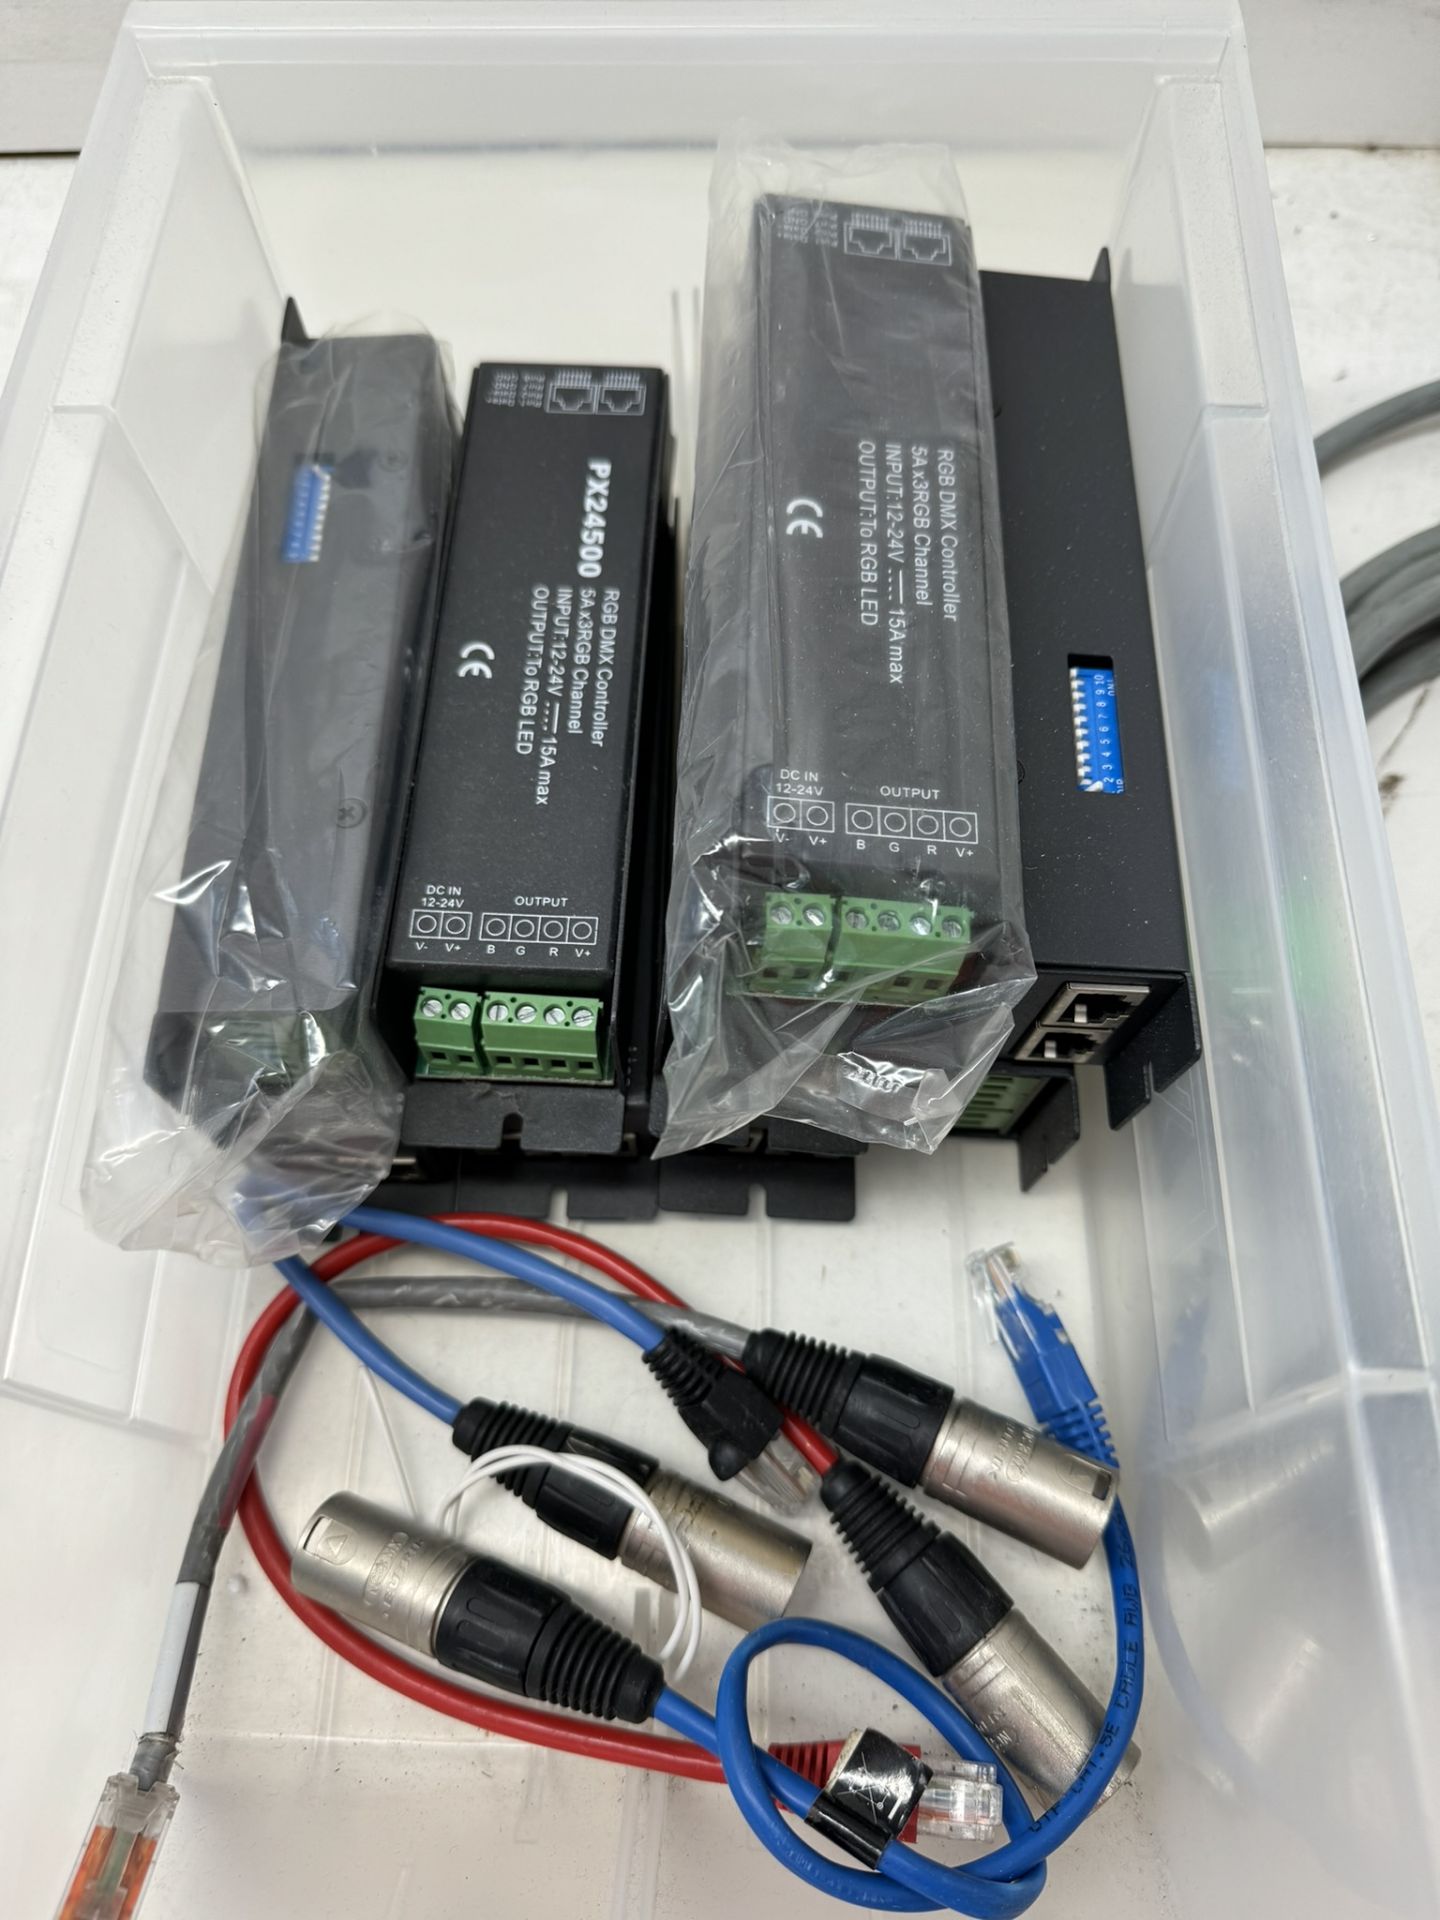 10 x PX24500 RGB DMX Controllers - Image 4 of 4